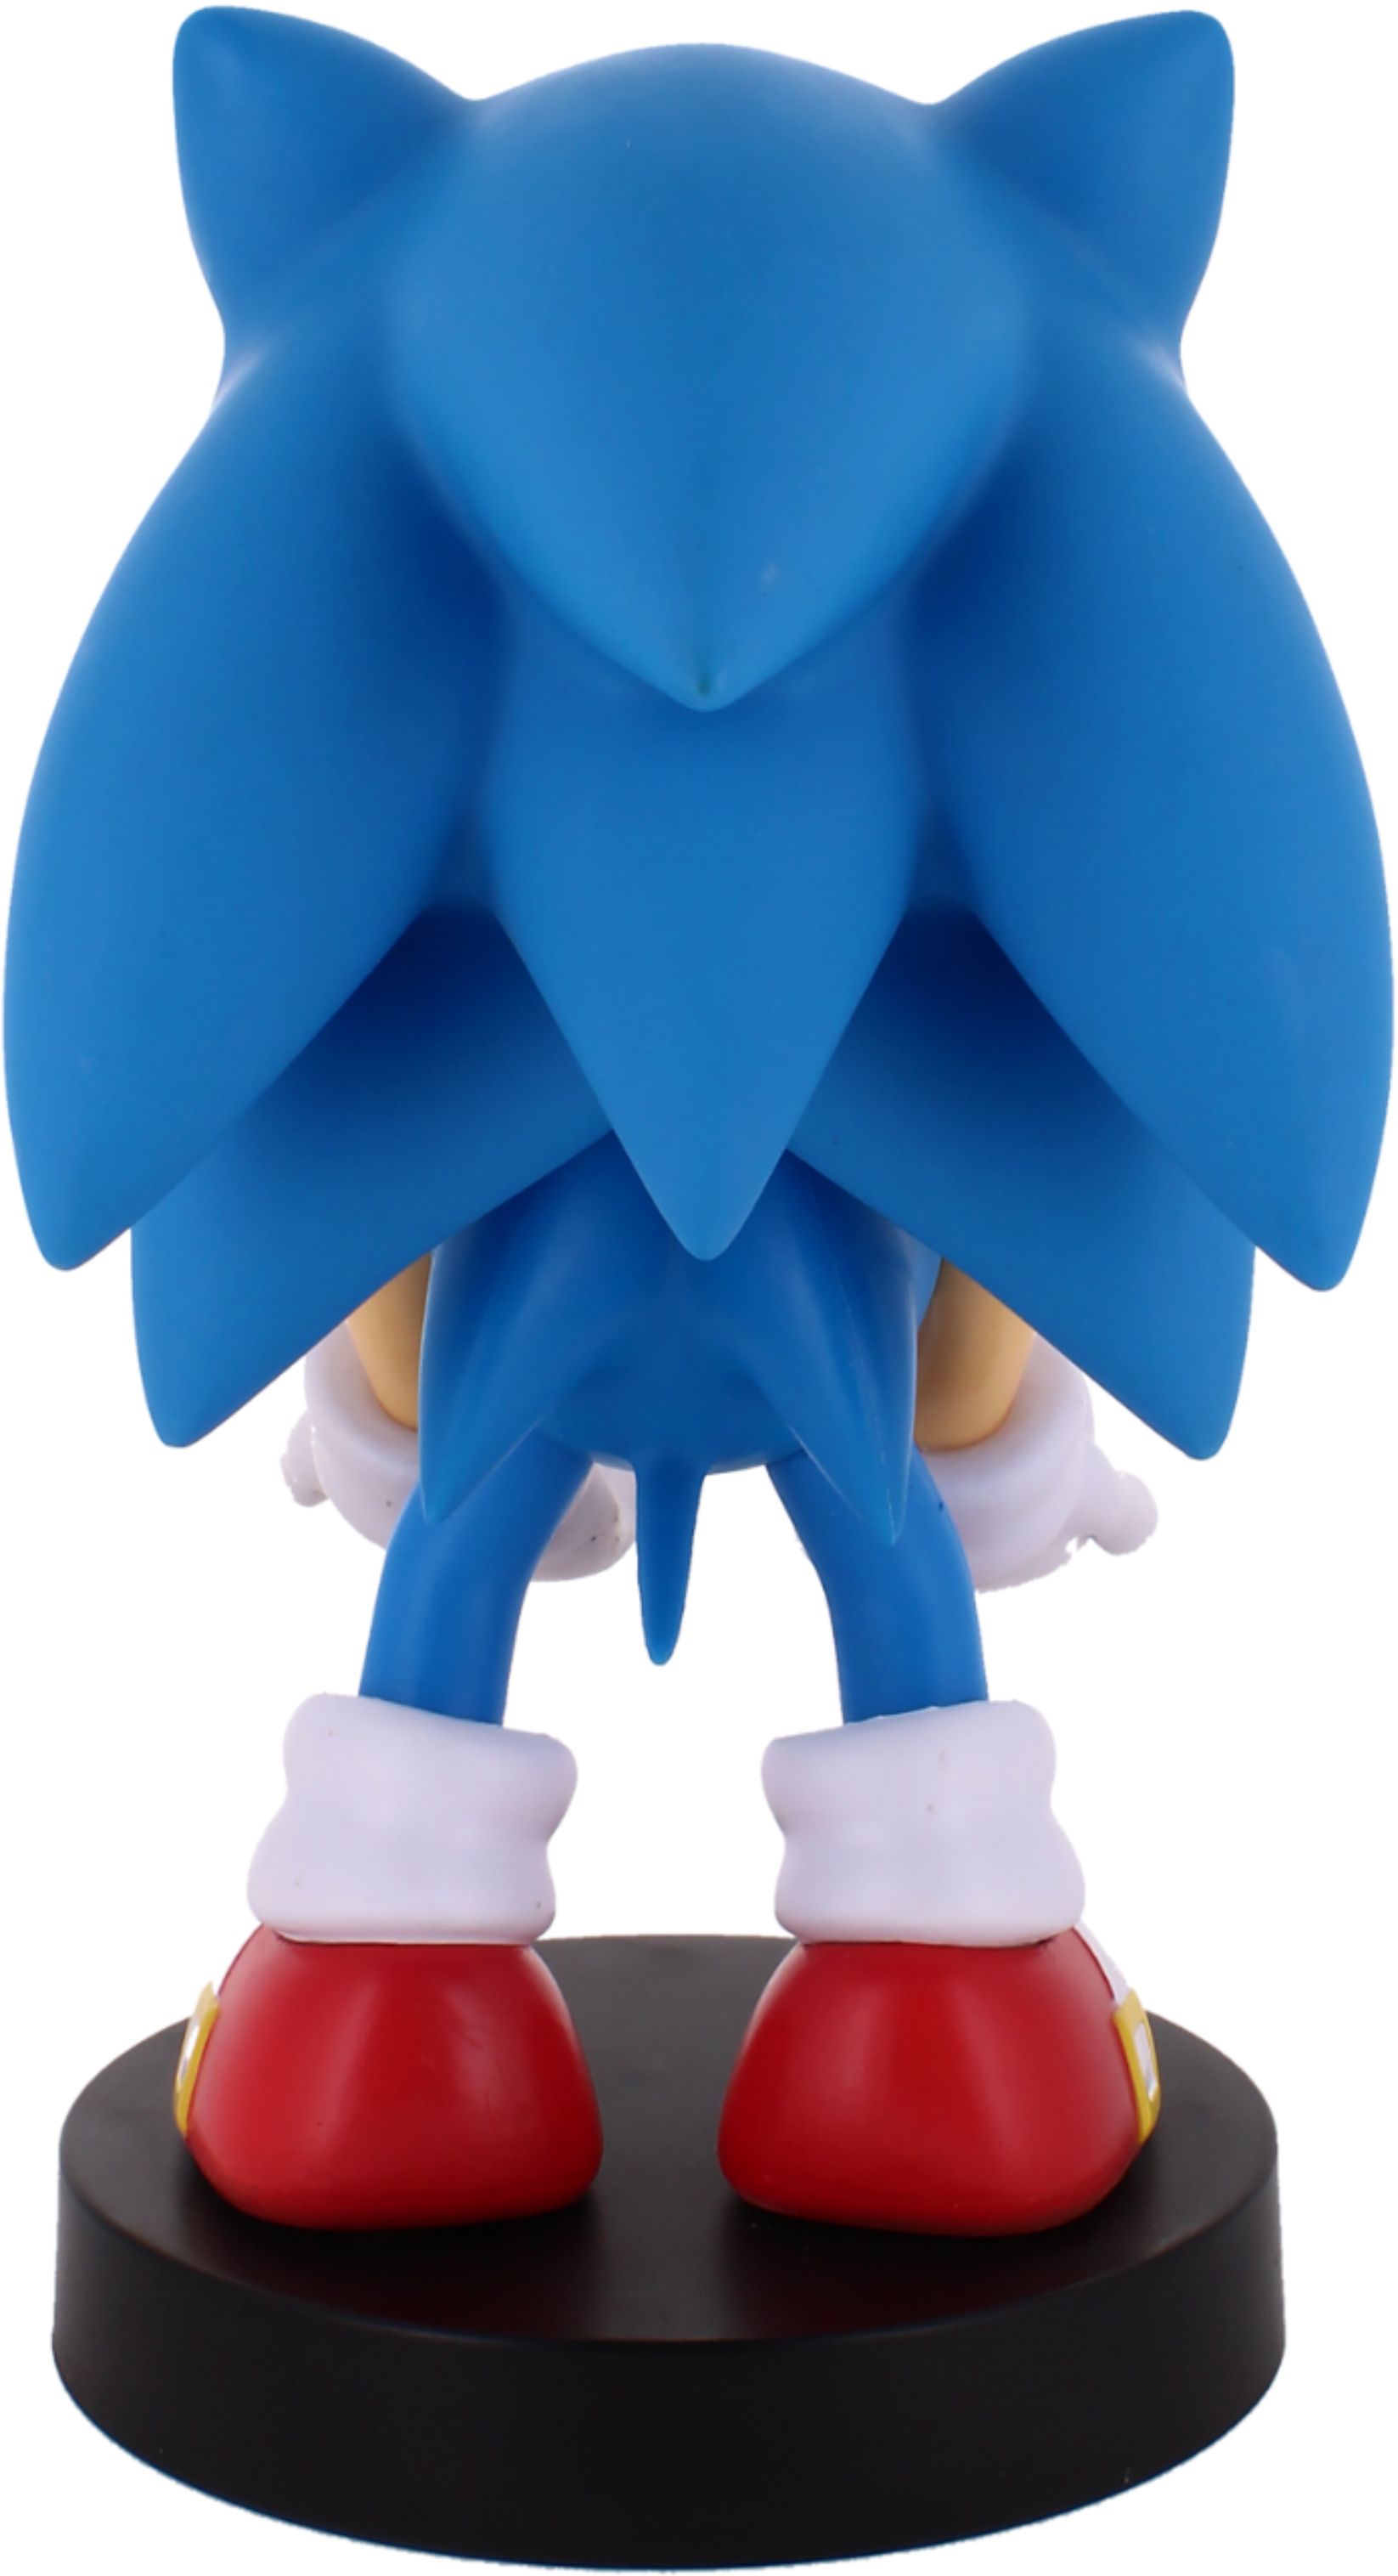 Figurine Sonic - Classic Sonic (Cable Guy)